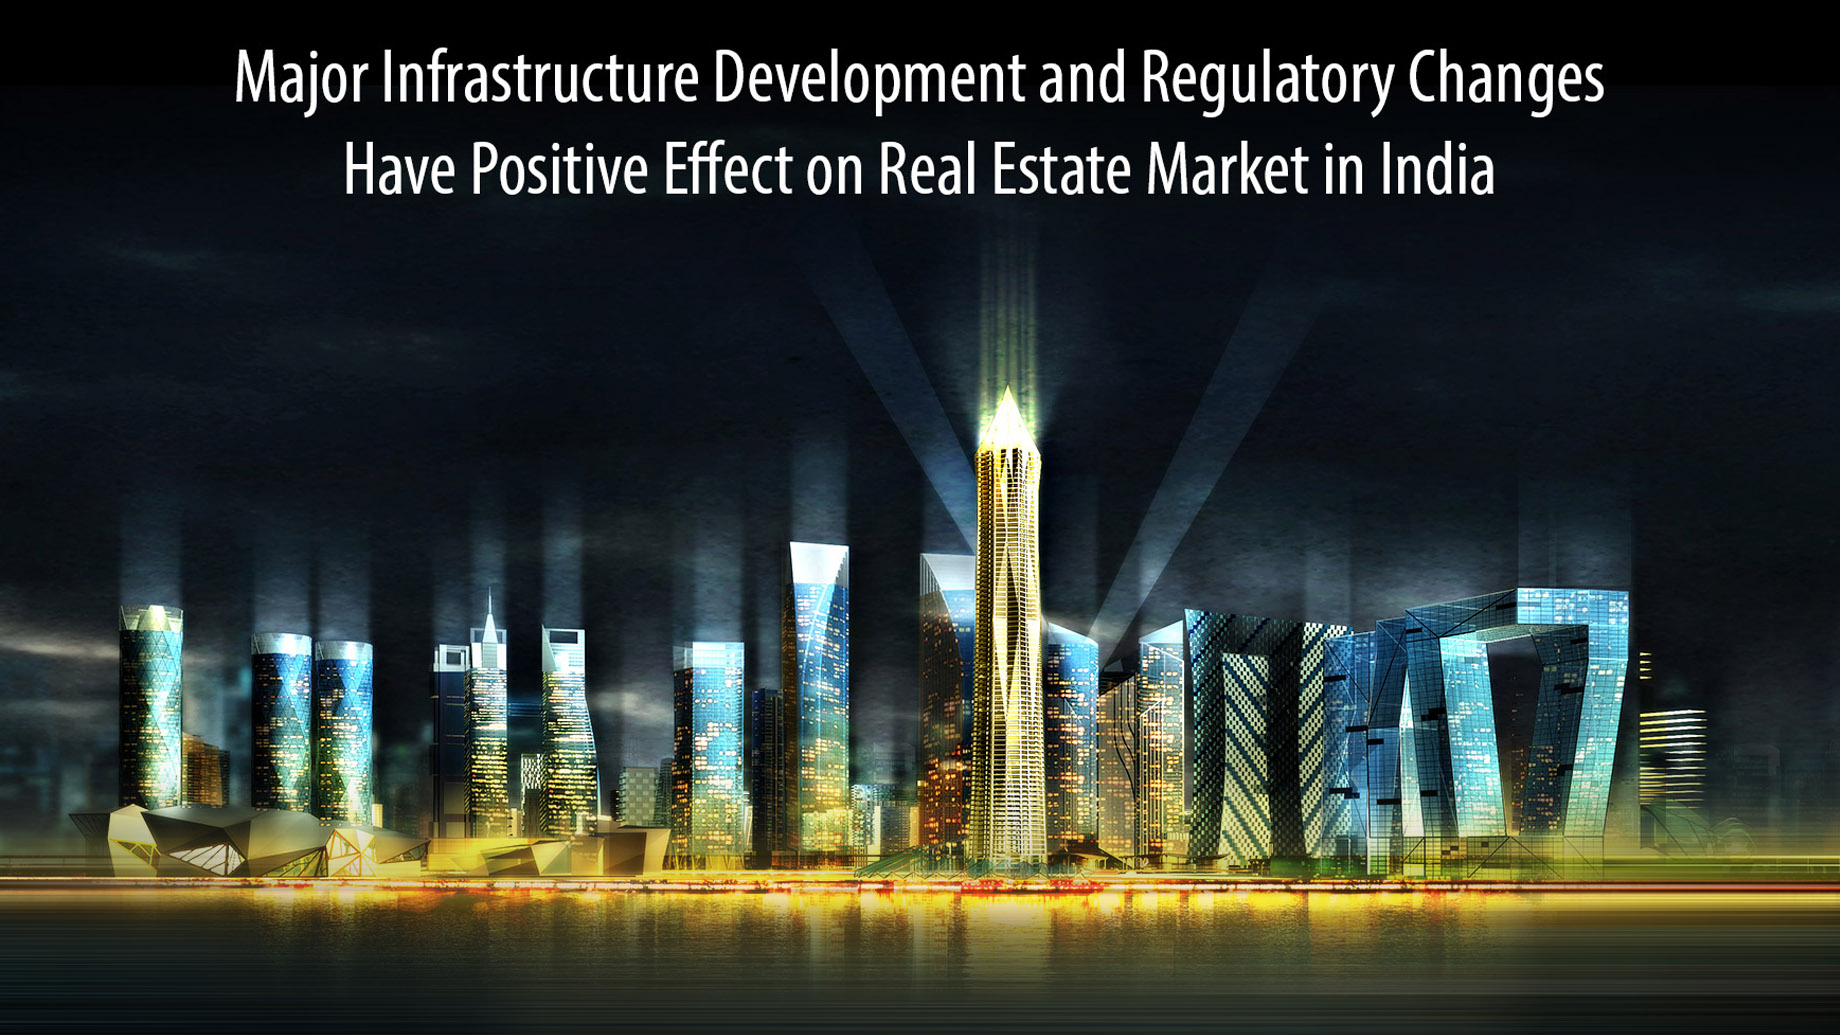 Major Infrastructure Development Have Positive Effect on Real Estate Market in India